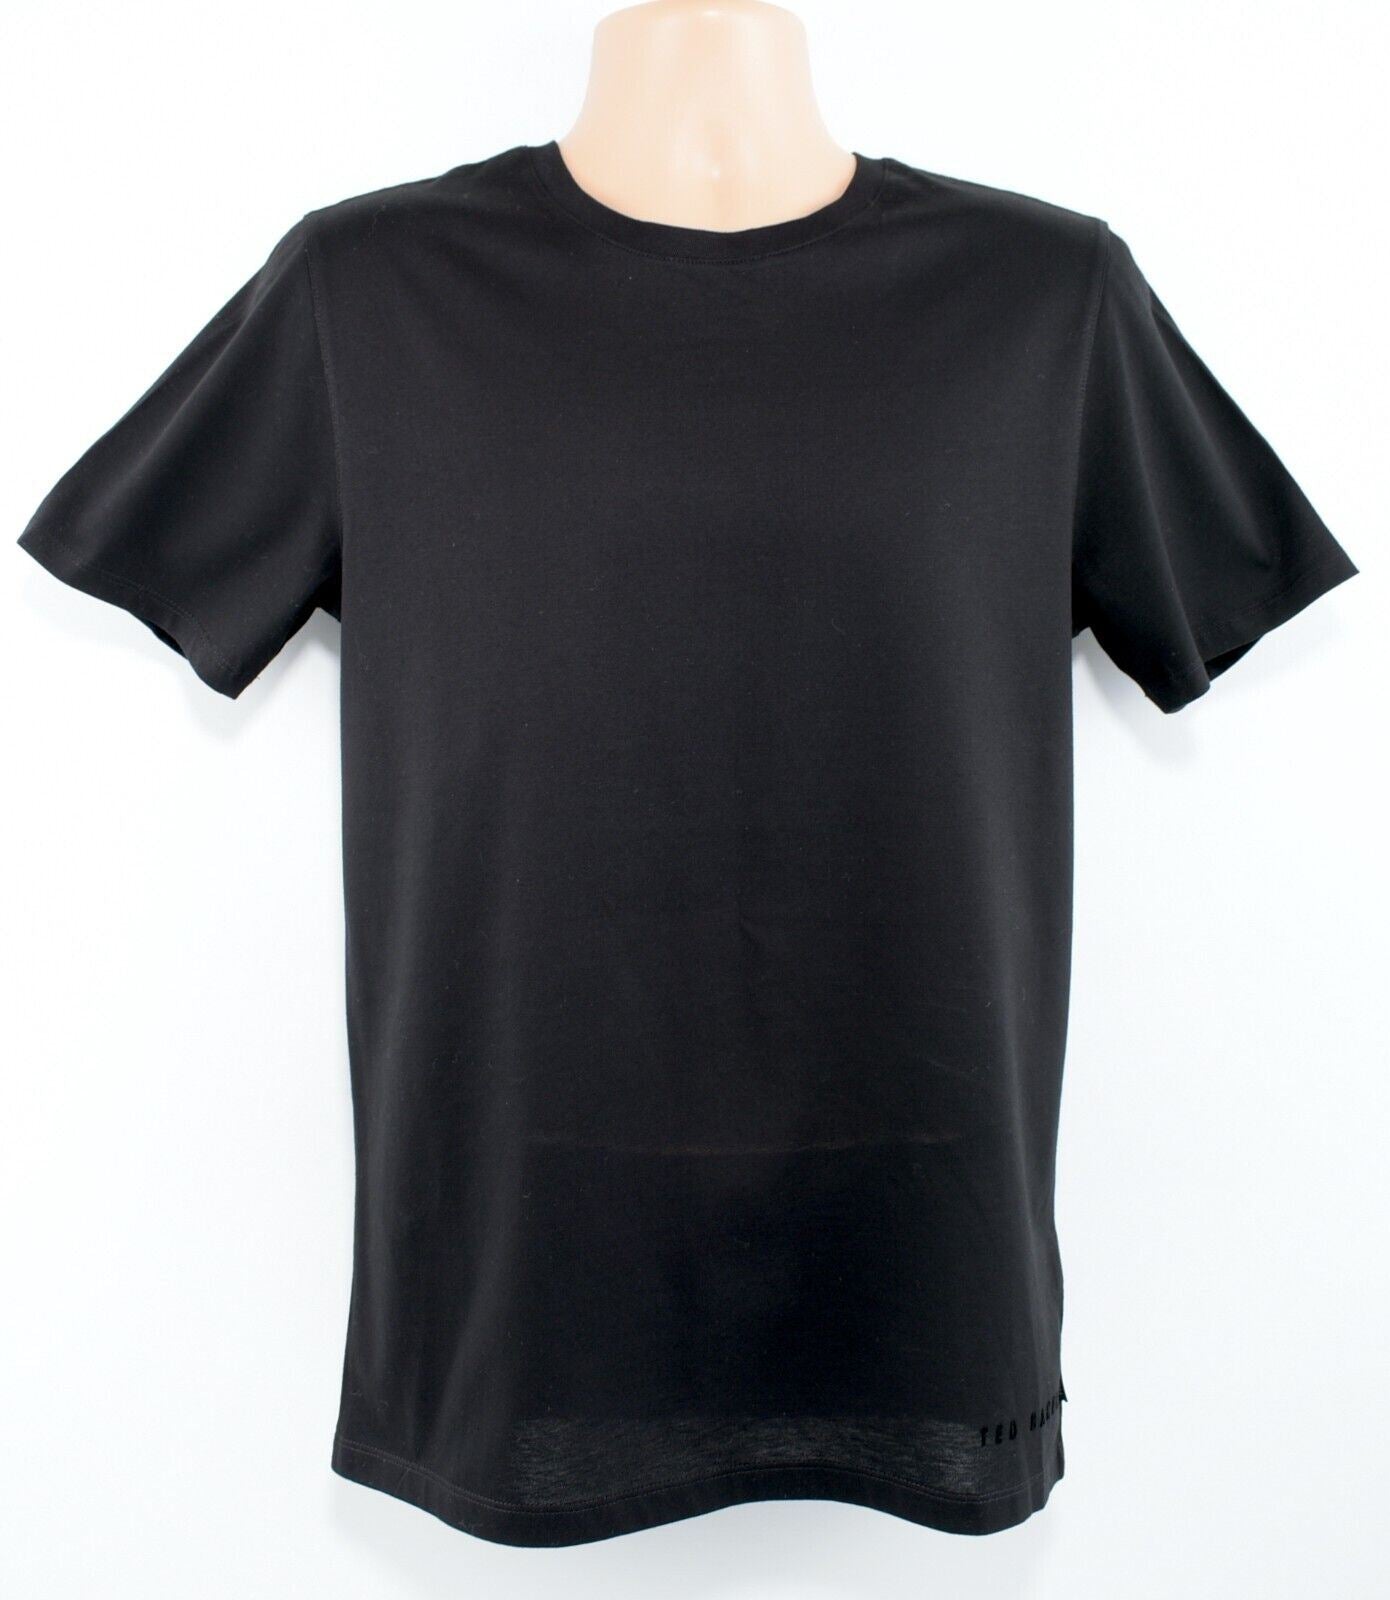 TED BAKER Mens ONLY Tee, Crew Neck T-shirt, Black, Ted size 2 /SMALL